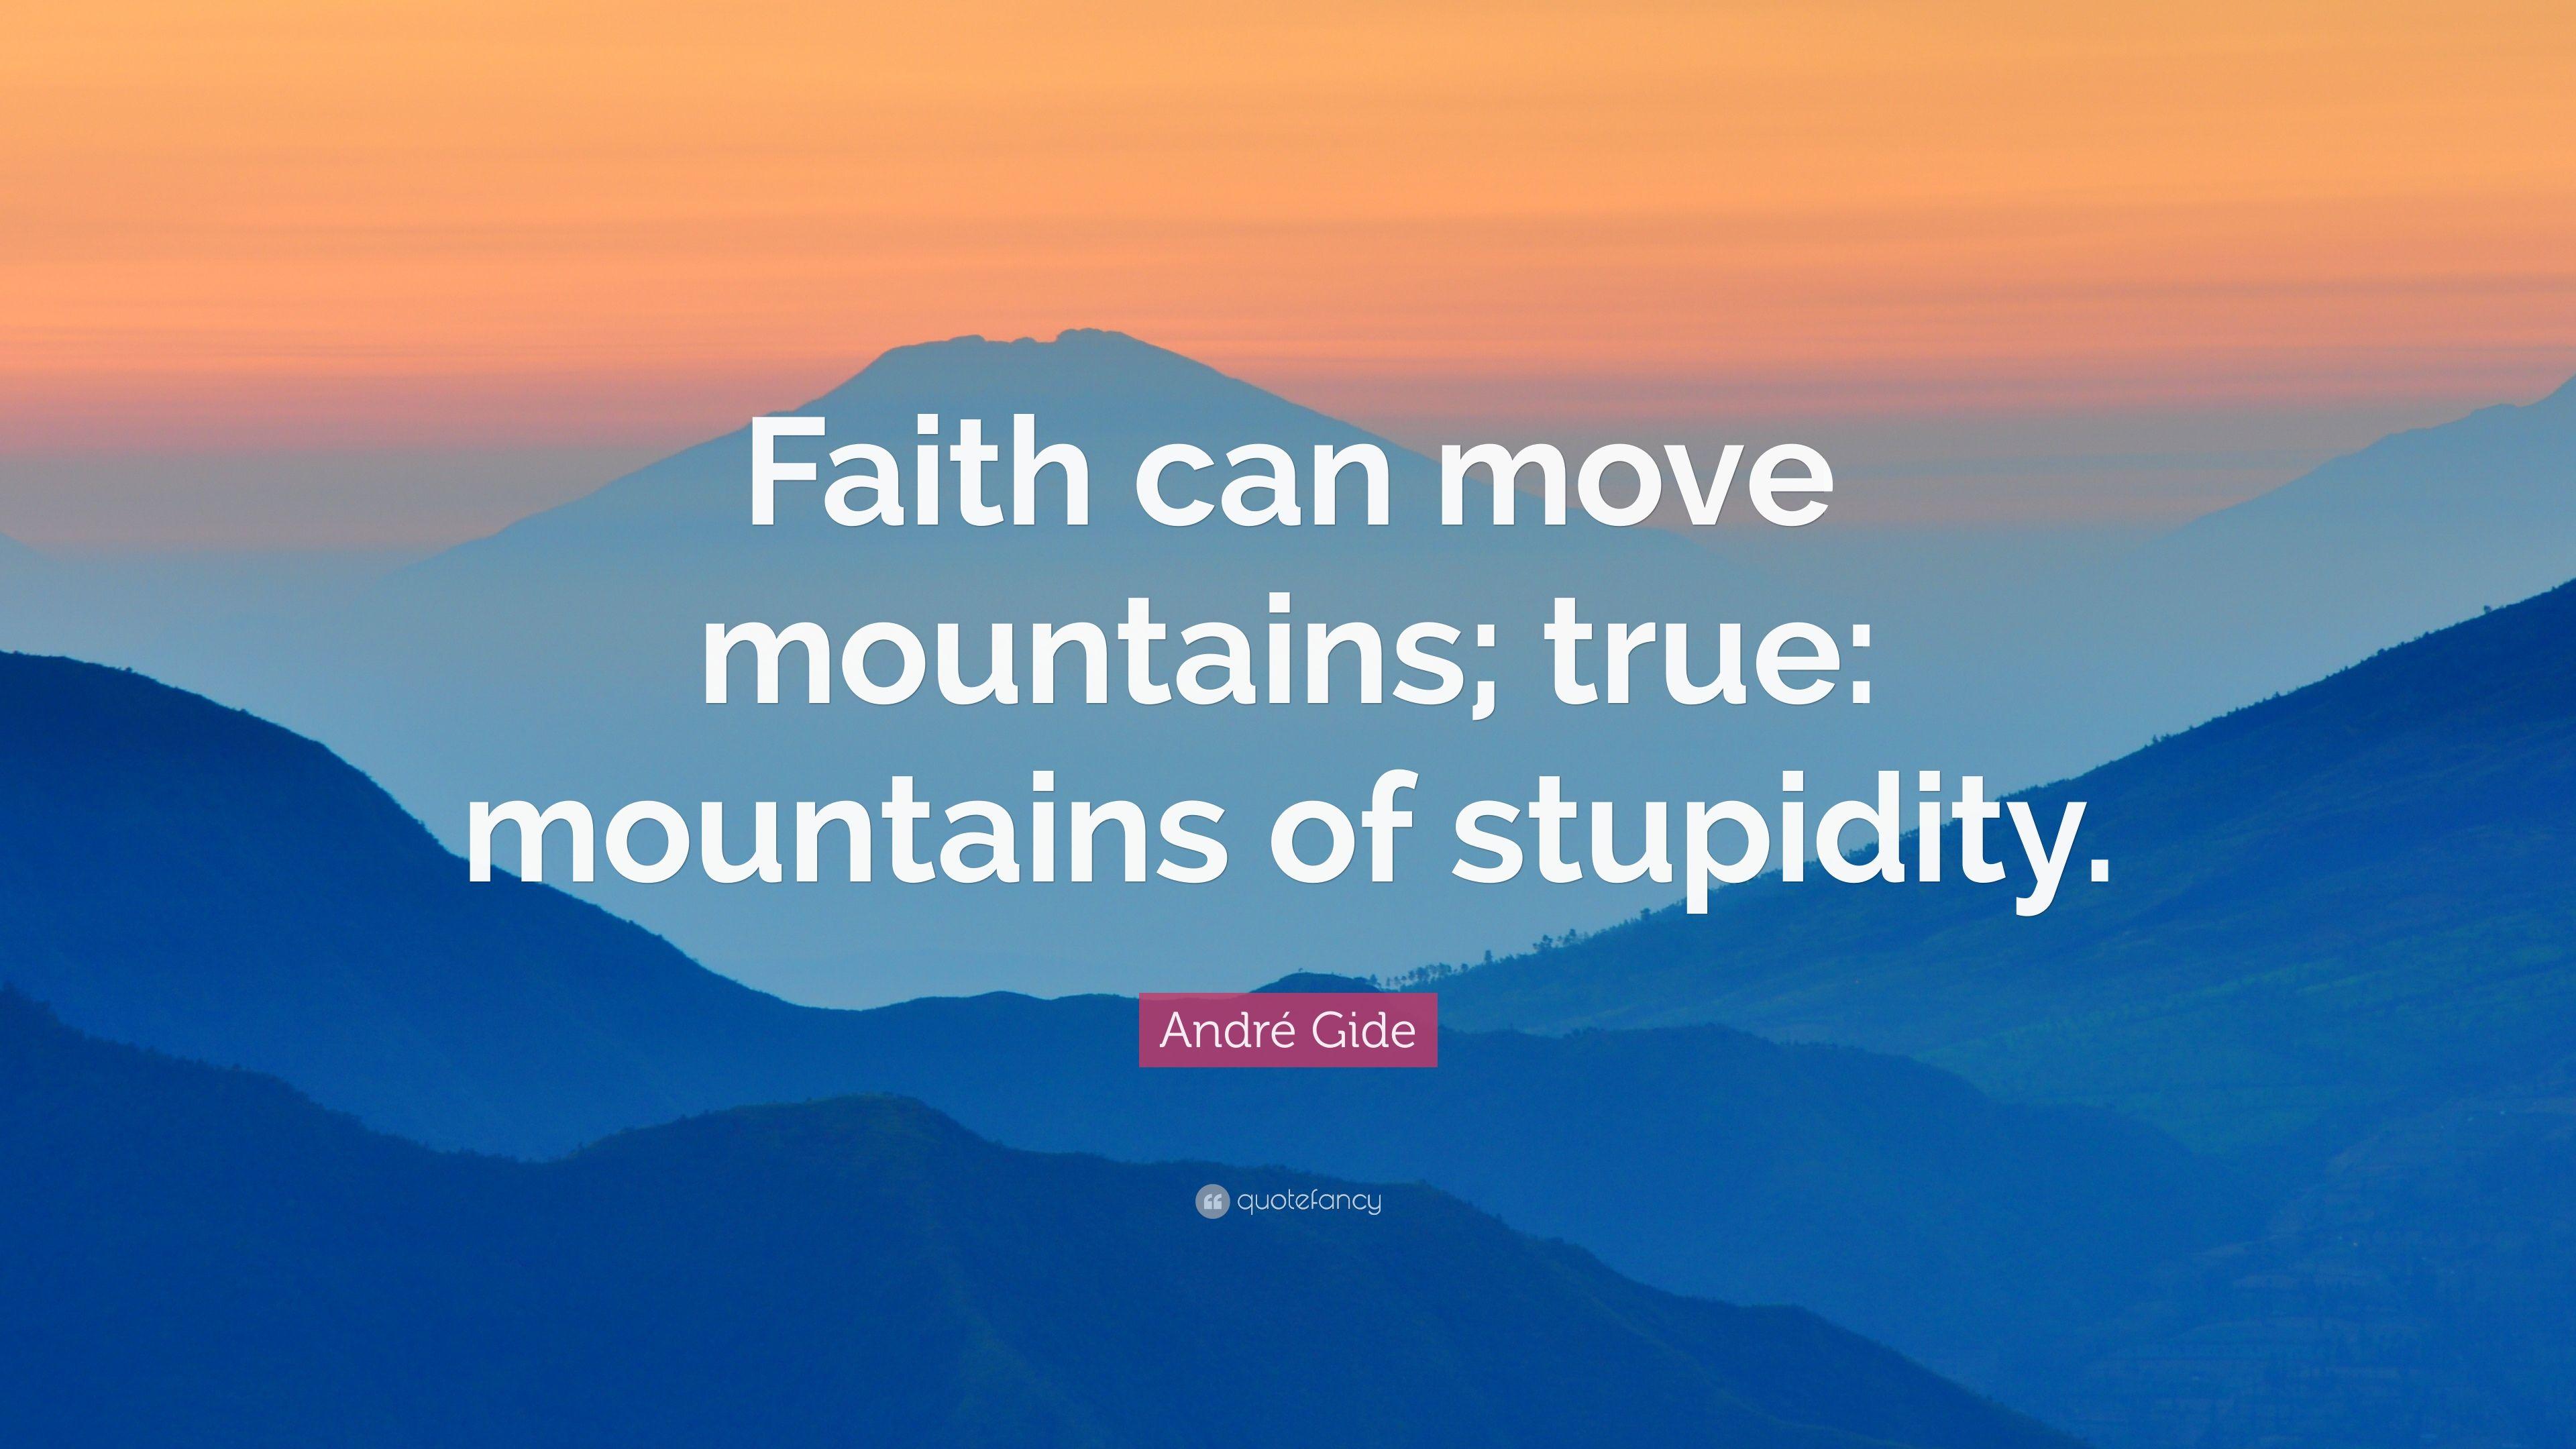 André Gide Quote: “Faith can move mountains; true: mountains